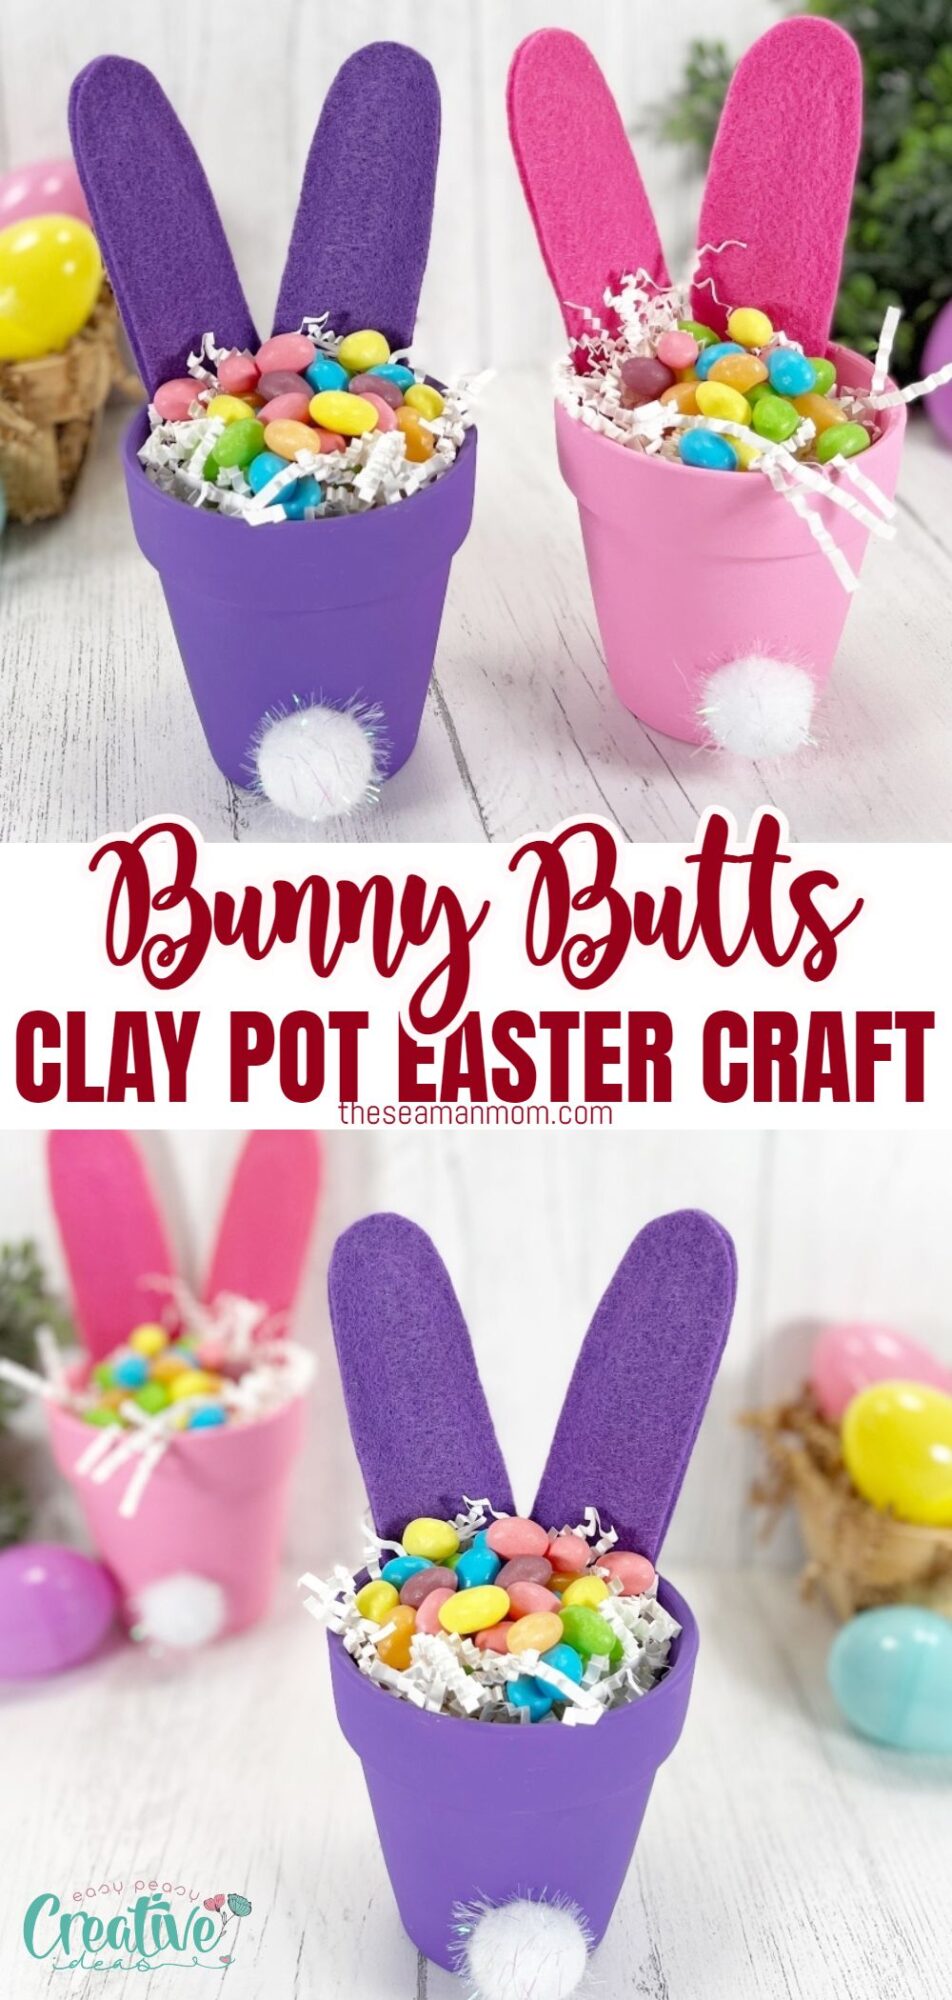 Easter bunny butts made of clay pots, a cute Easter craft idea.